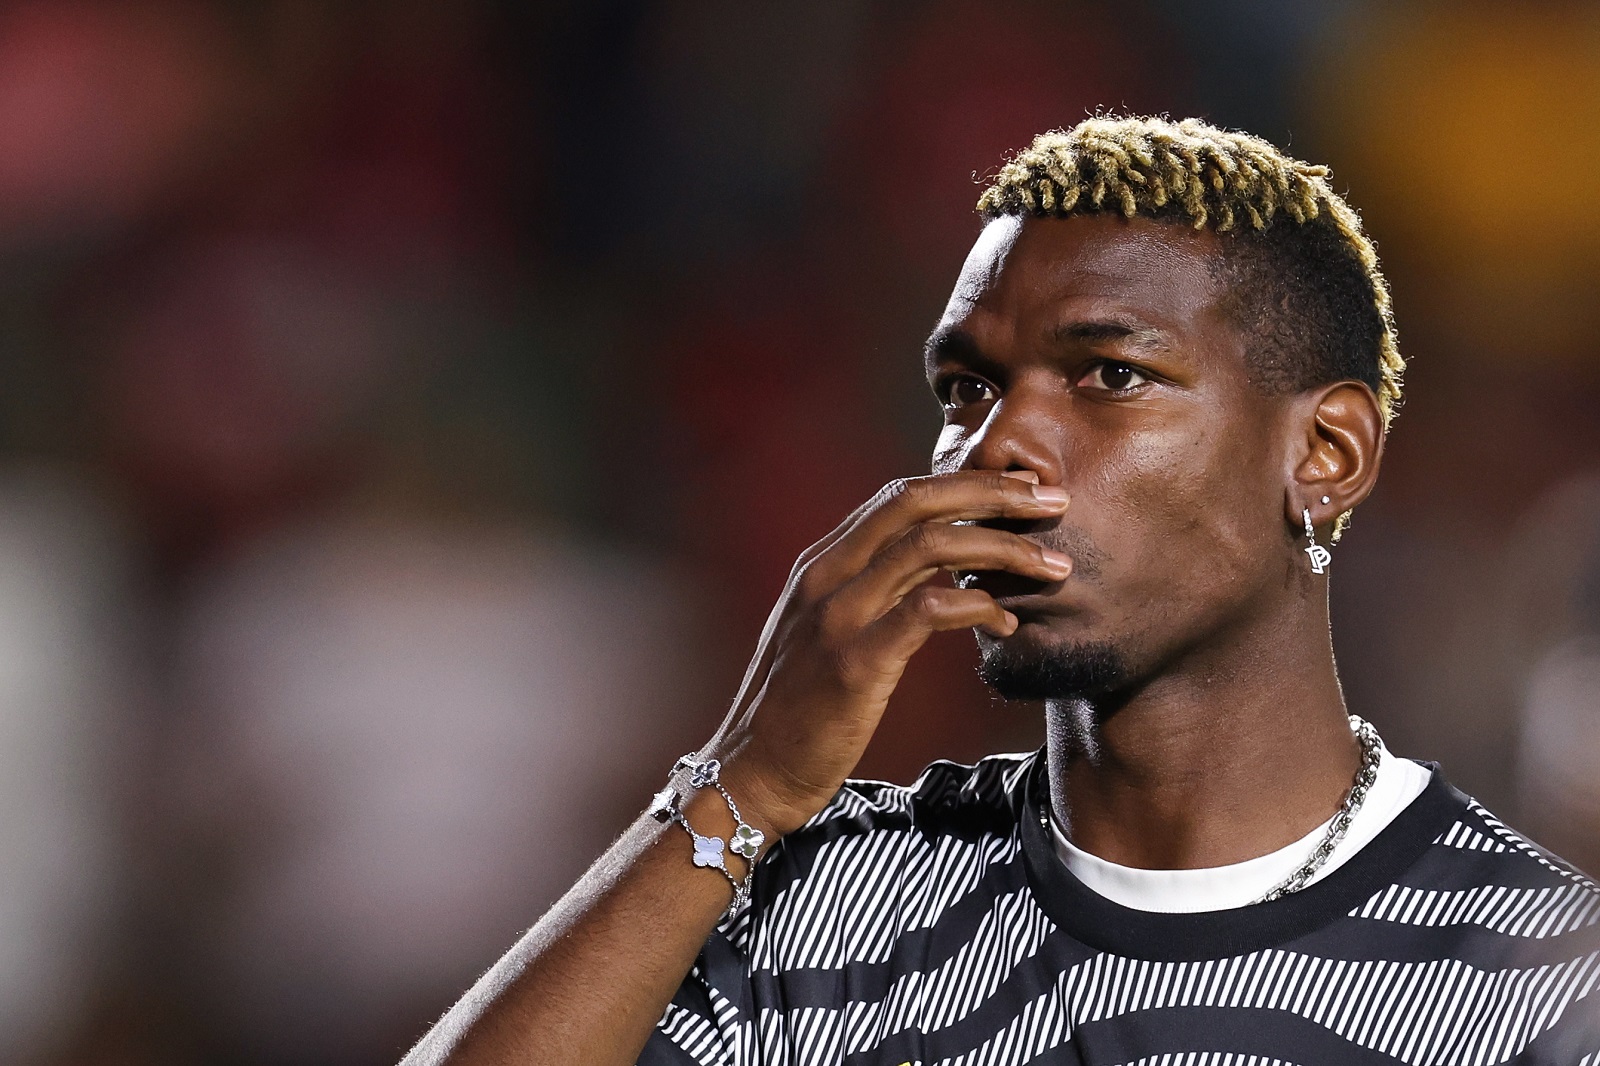 Paul Pogba has effectively been subdued out of the media’s radar in the past few weeks, after failing his drug test and the subsequent appeal test.